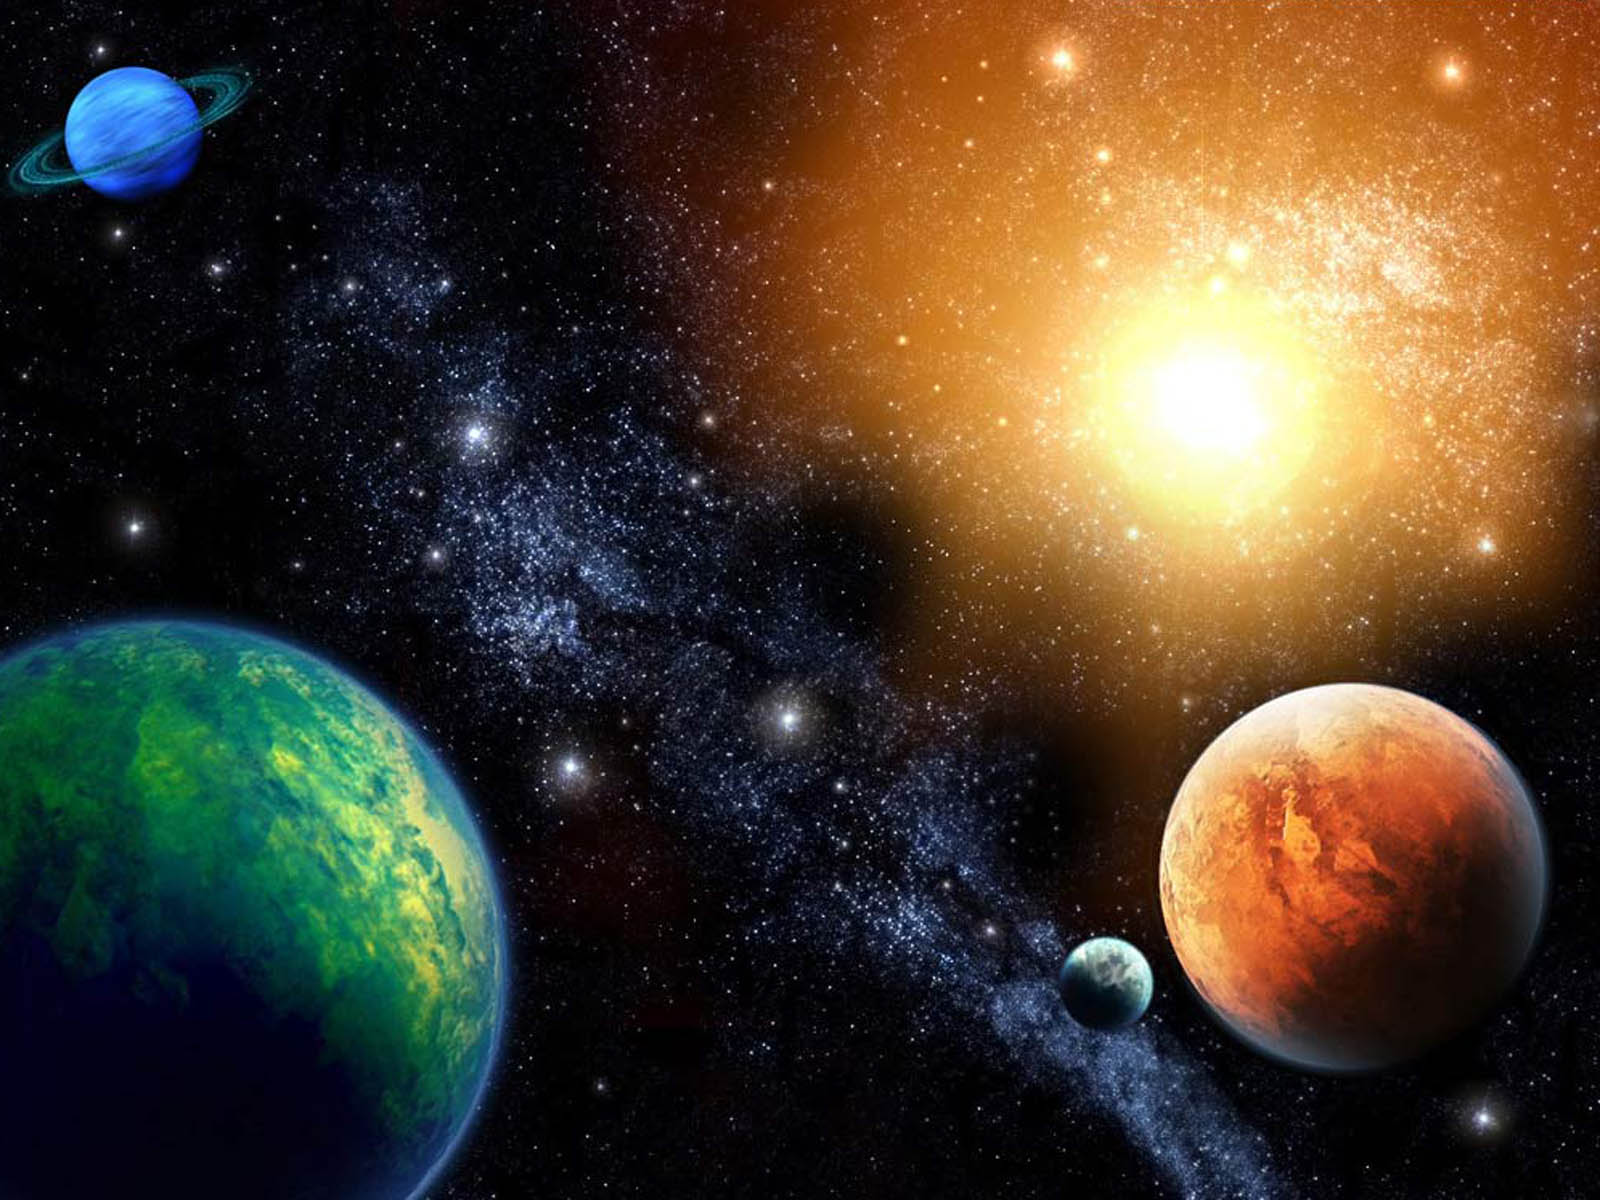 Tag Solar System Wallpapers Backgrounds Photos Images and Pictures 1600x1200